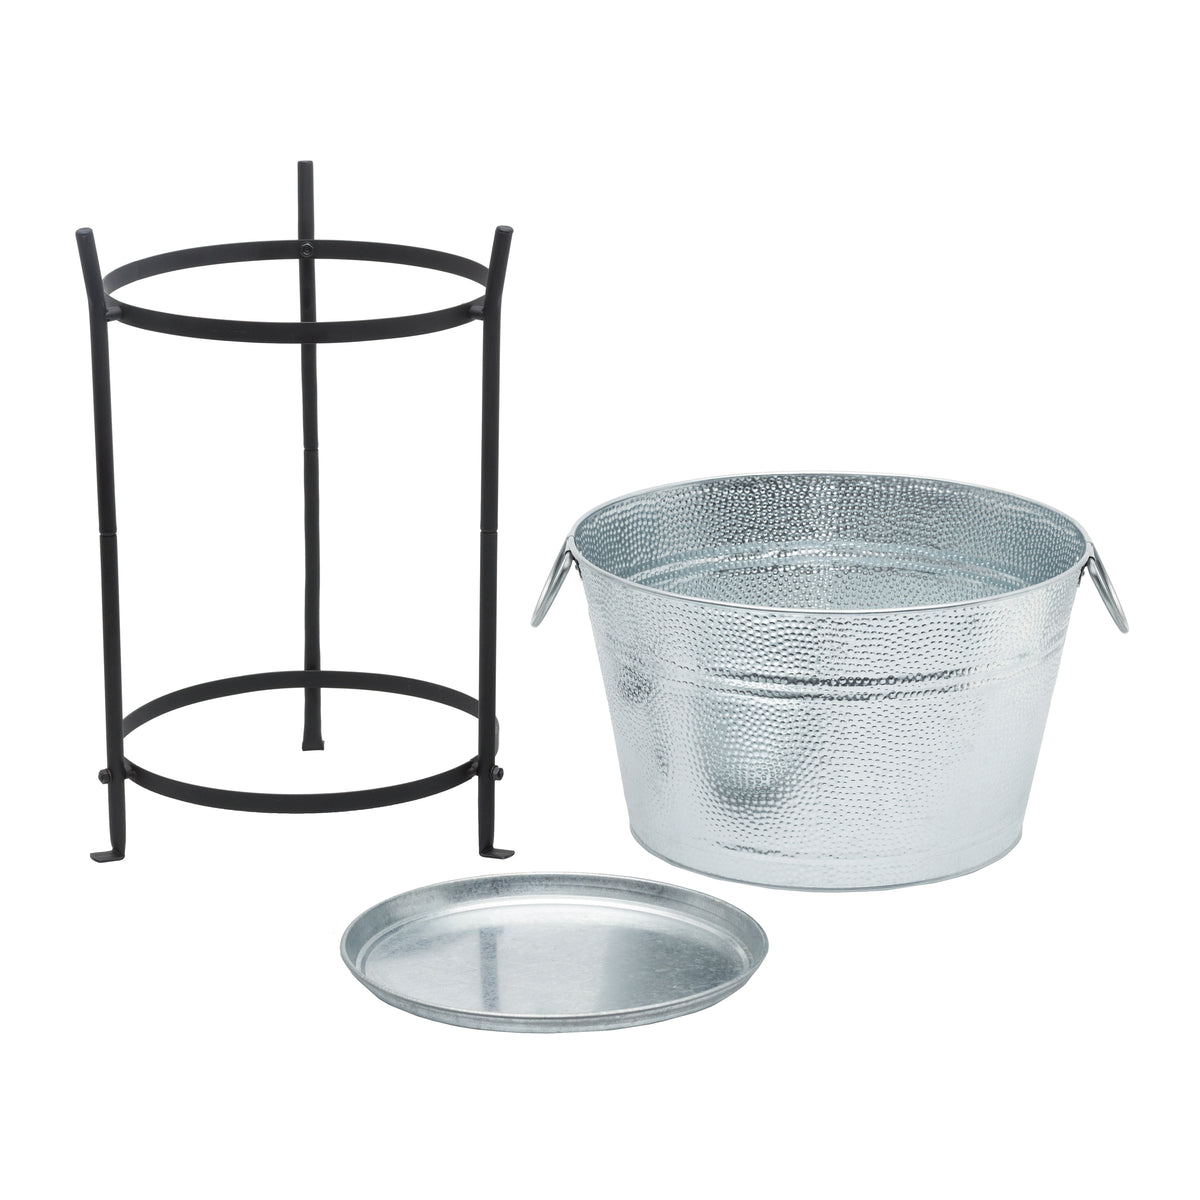 Beverage Tub with Stand and Tray by Saratoga Home 3 inclusion parts